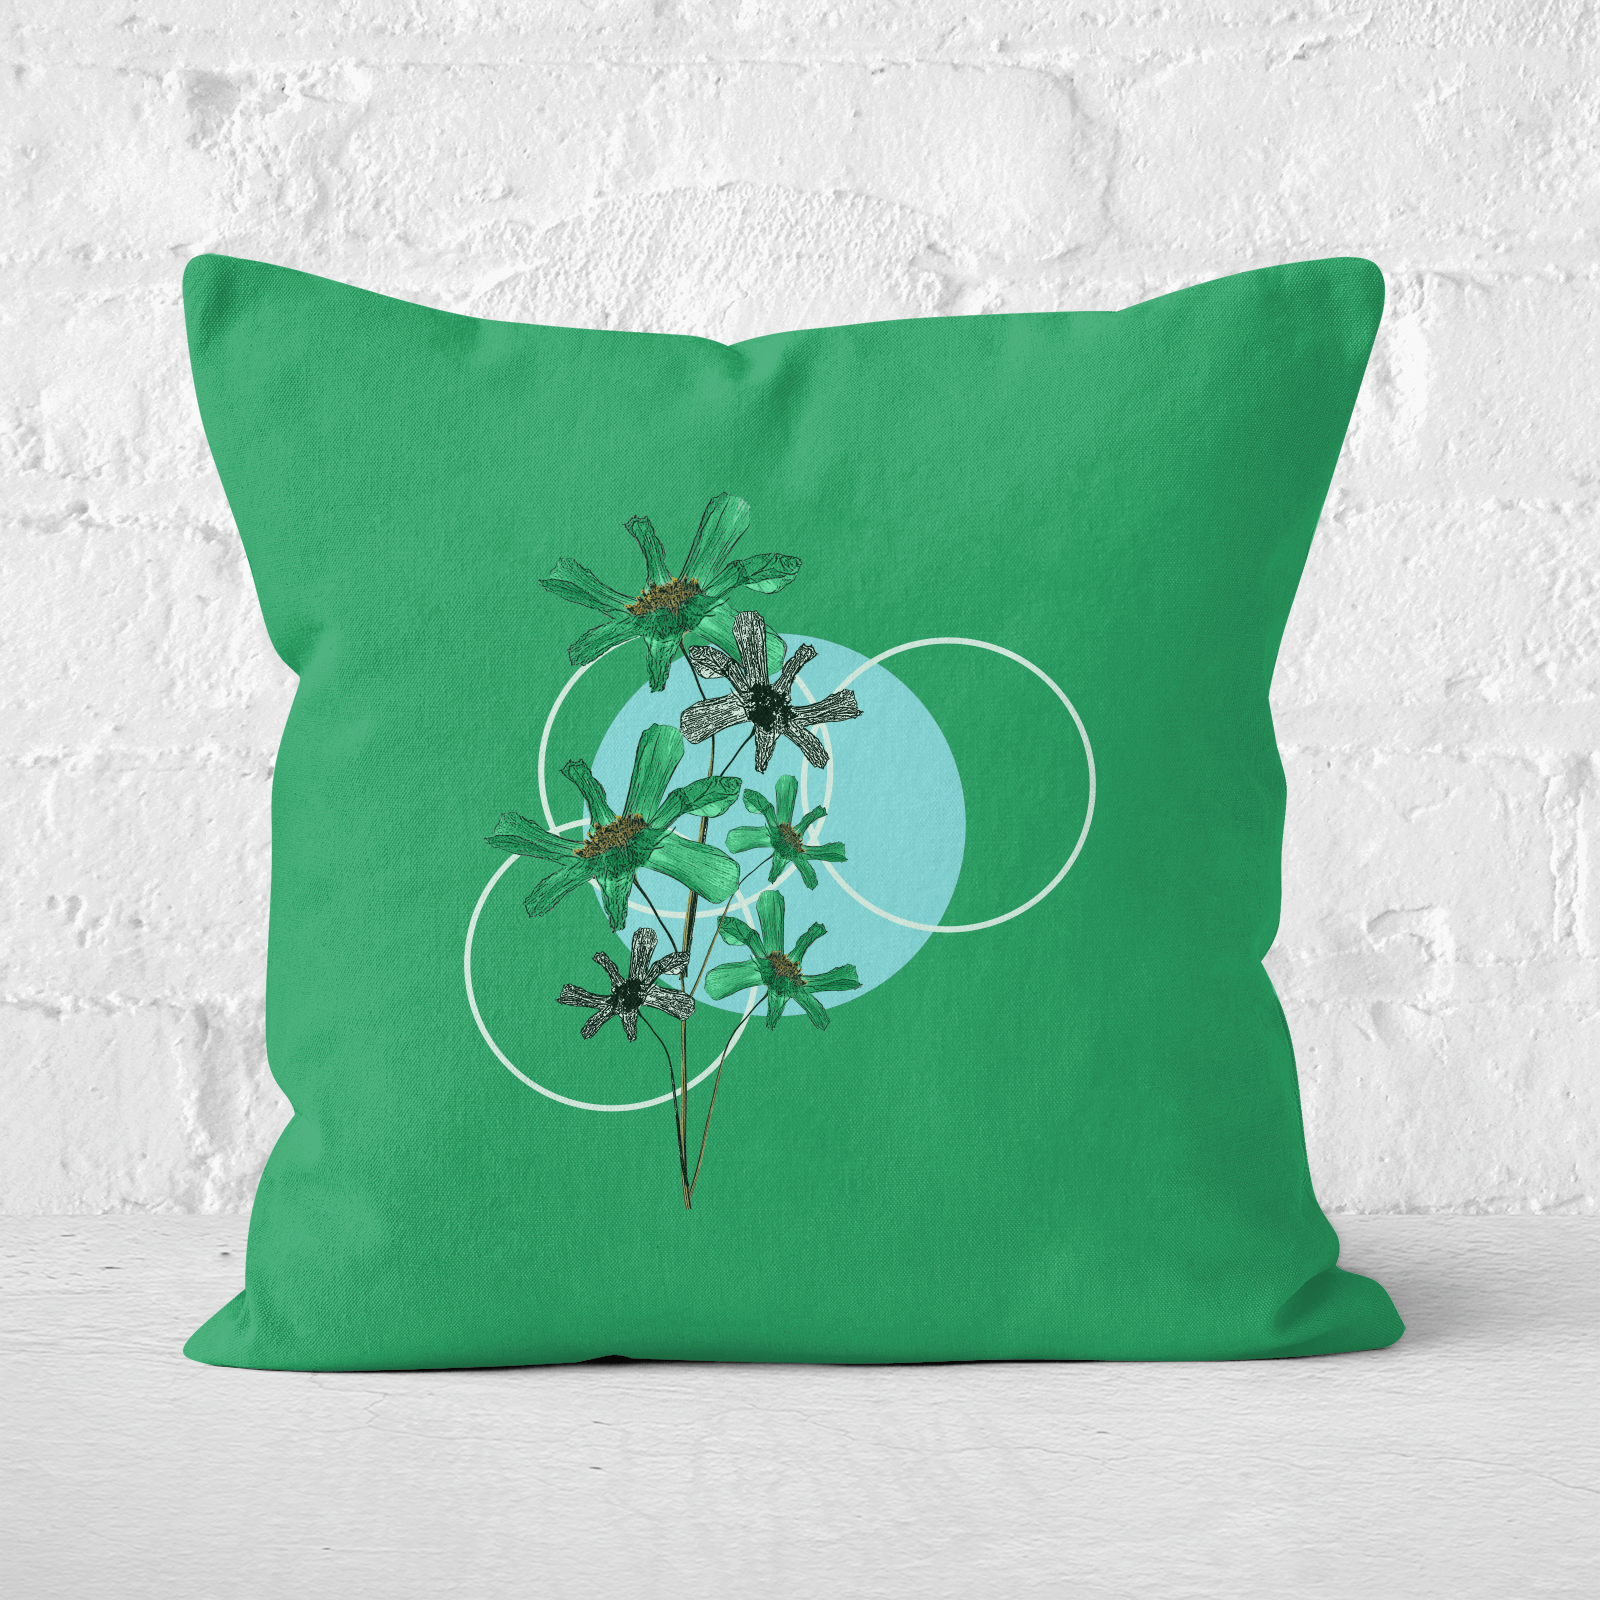 Pressed Flowers Cool Tones Flowers and Circles Square Cushion - 60x60cm - Soft Touch